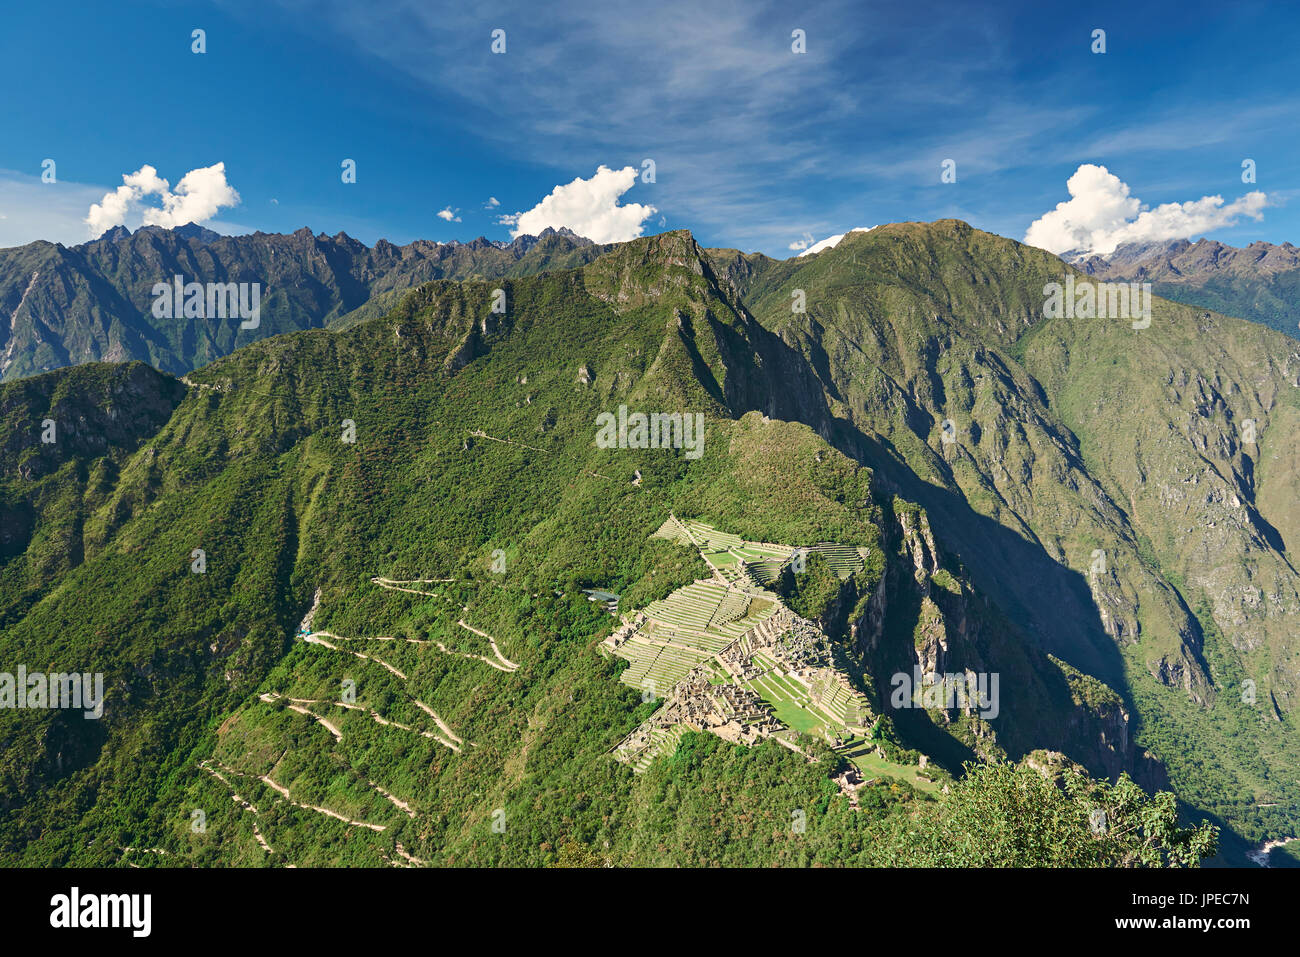 Ancient Machu Picchu town in green mountain landscape under blue sky Stock Photo